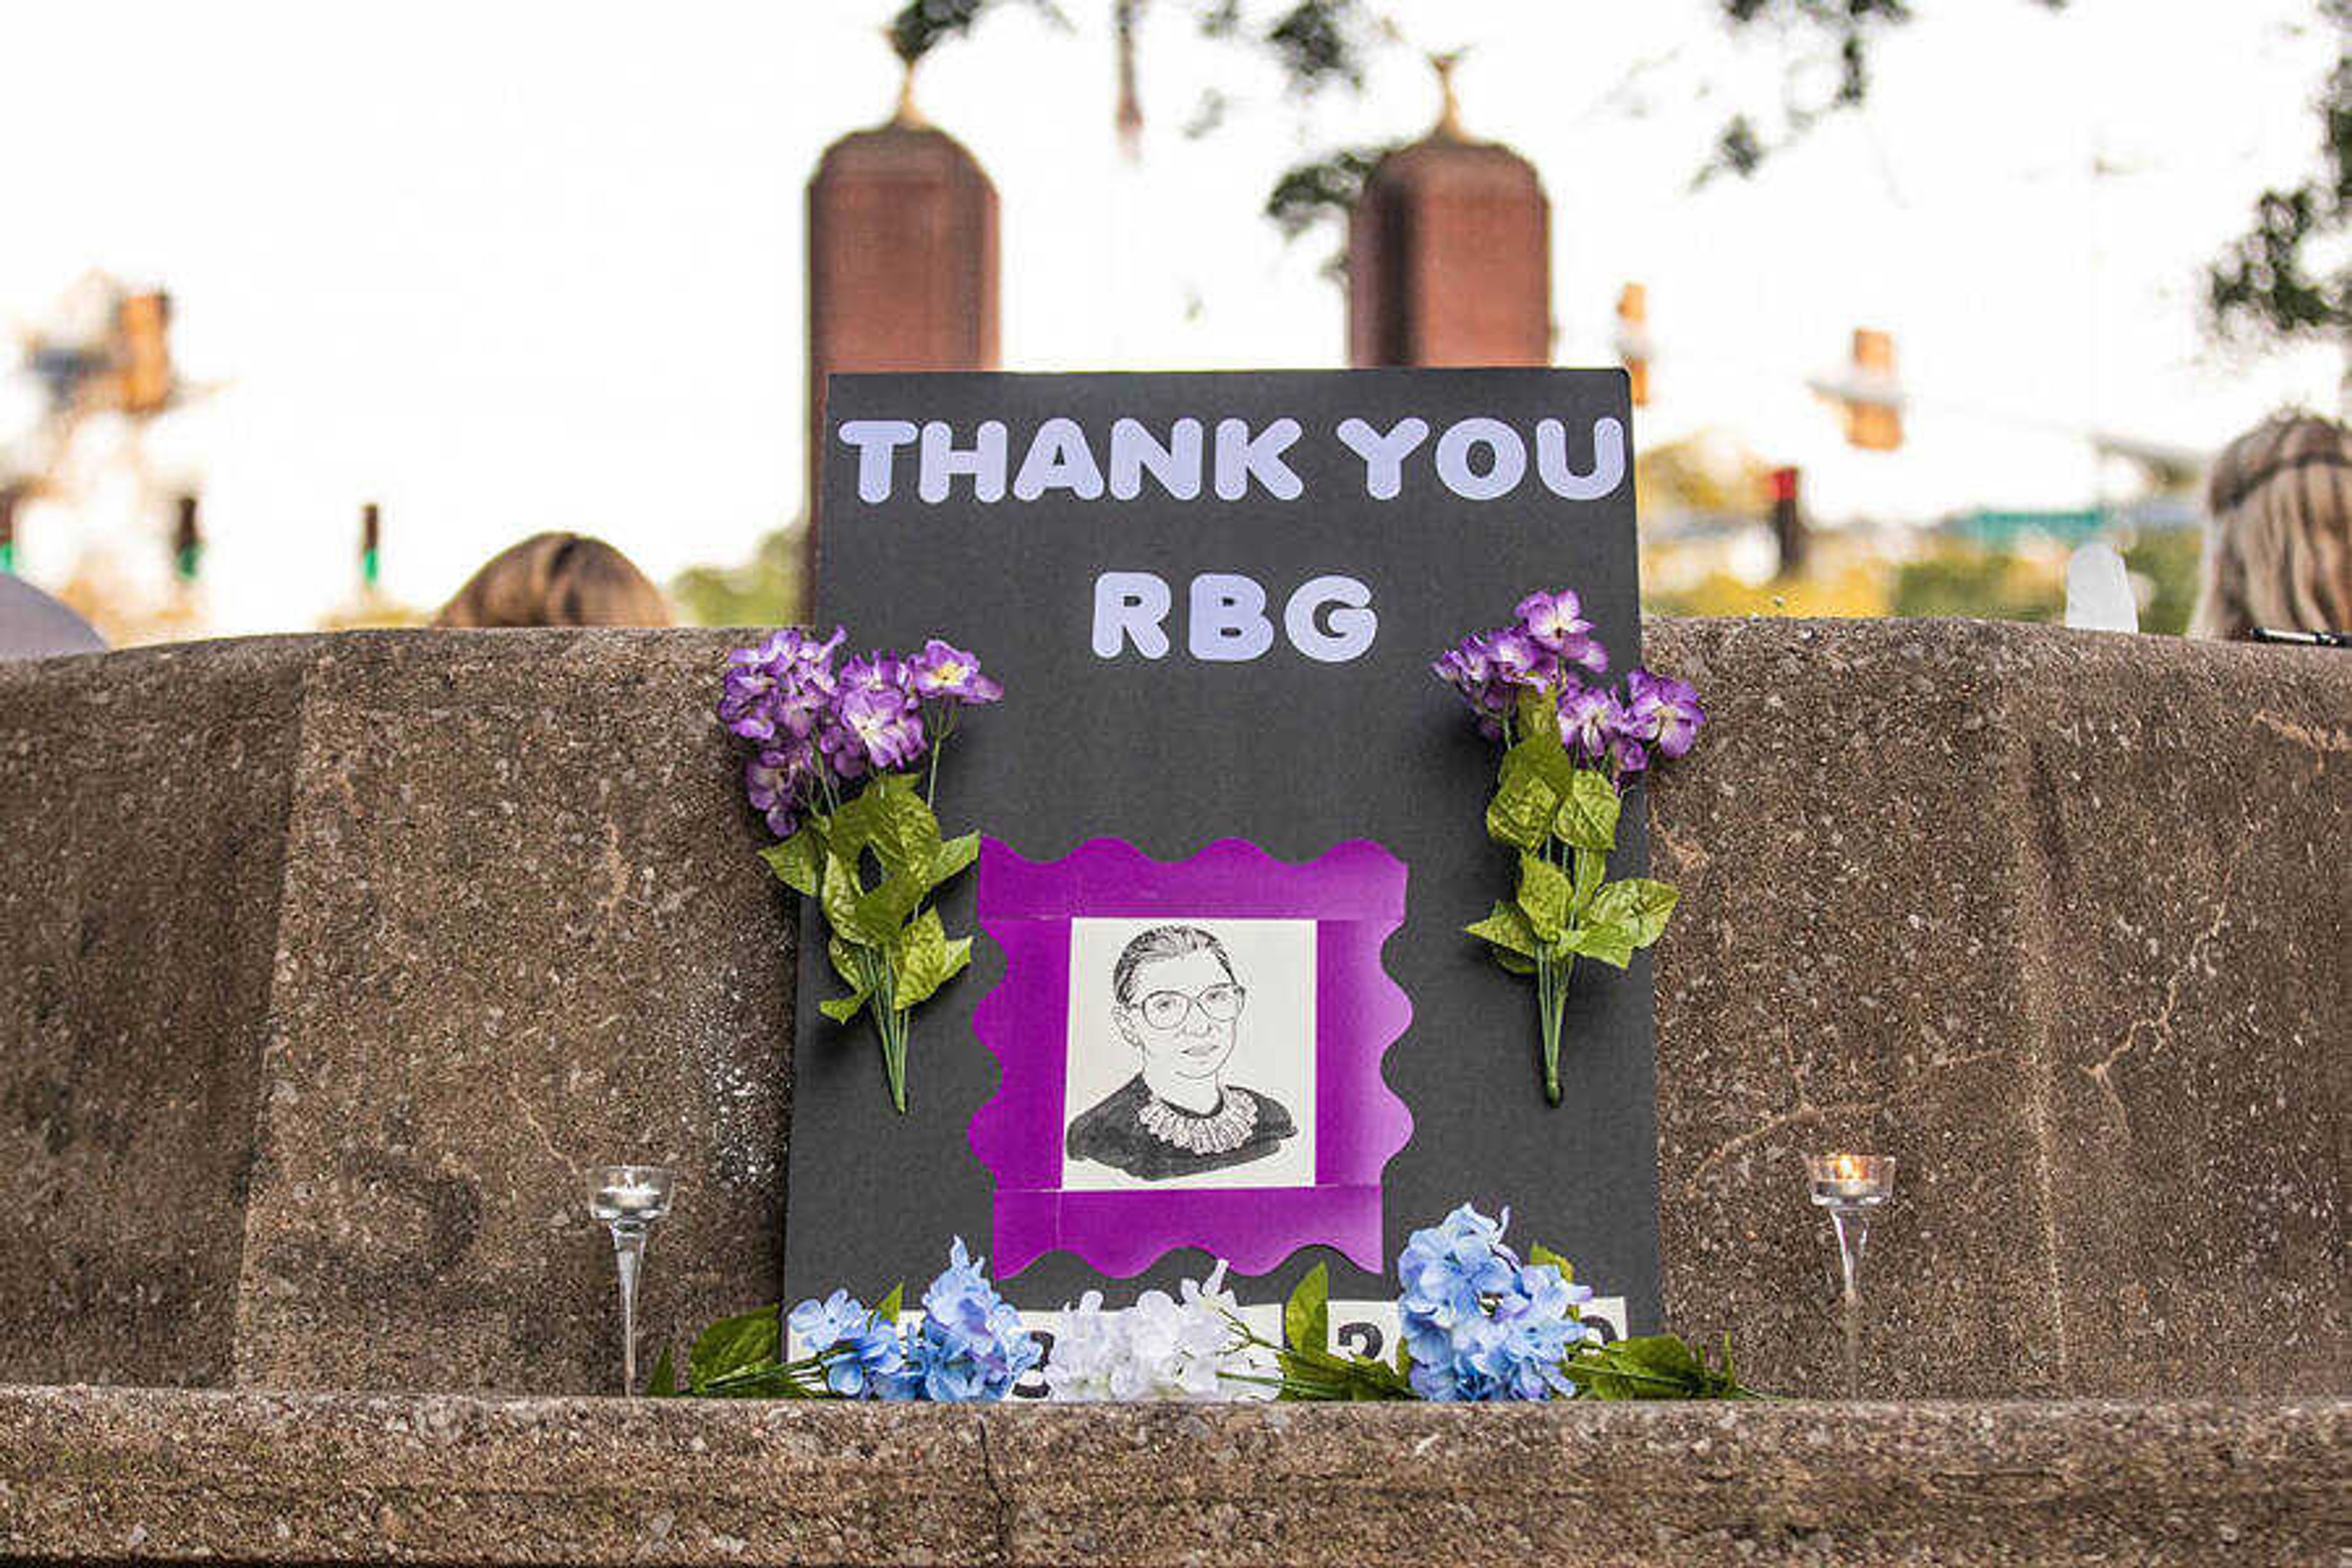 A tribute poster to Ruth Bader Ginsberg at a candlelight vigil in her honor on Sept. 20 at Capaha Park.